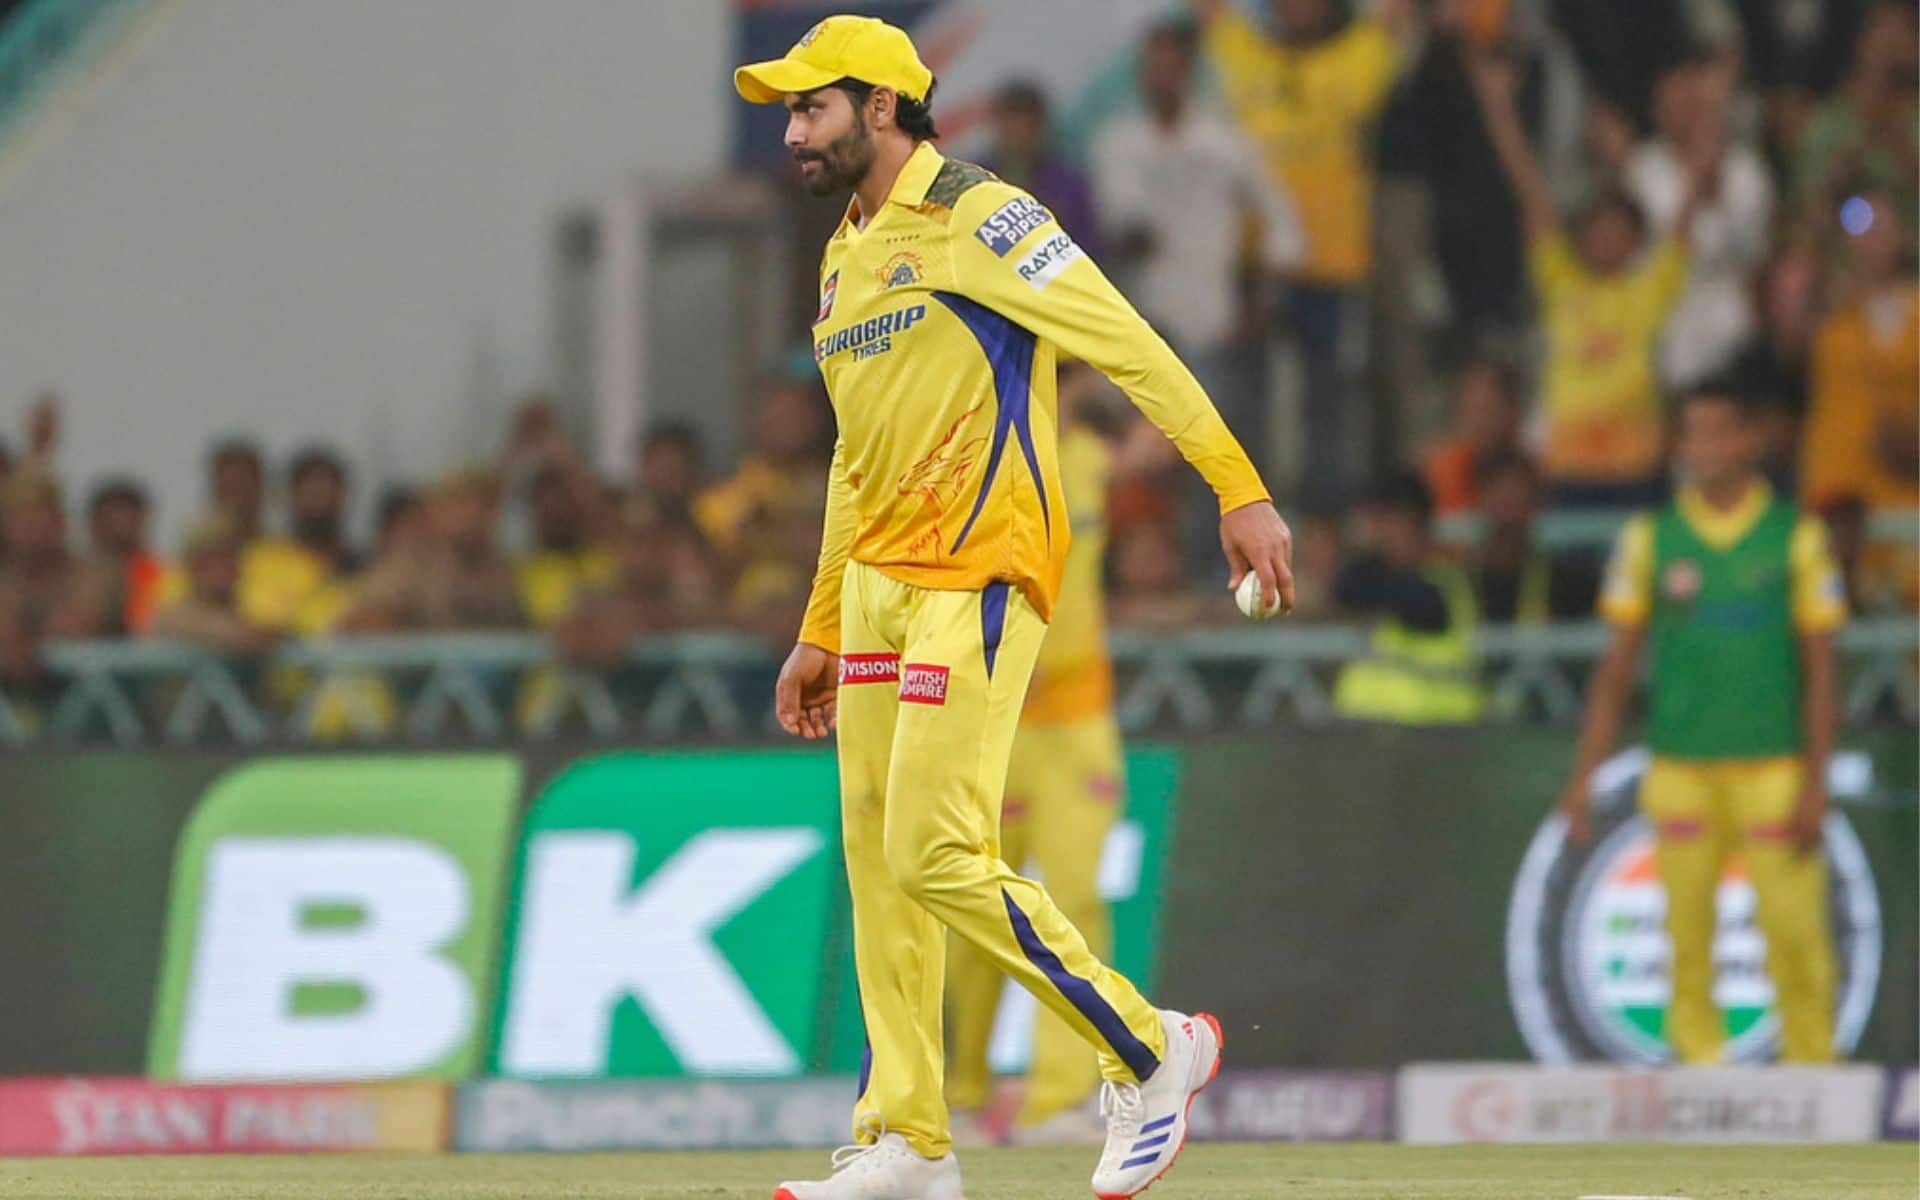 Ravindra Jadeja needs to step up with his performance for CSK in the match [AP Photos]